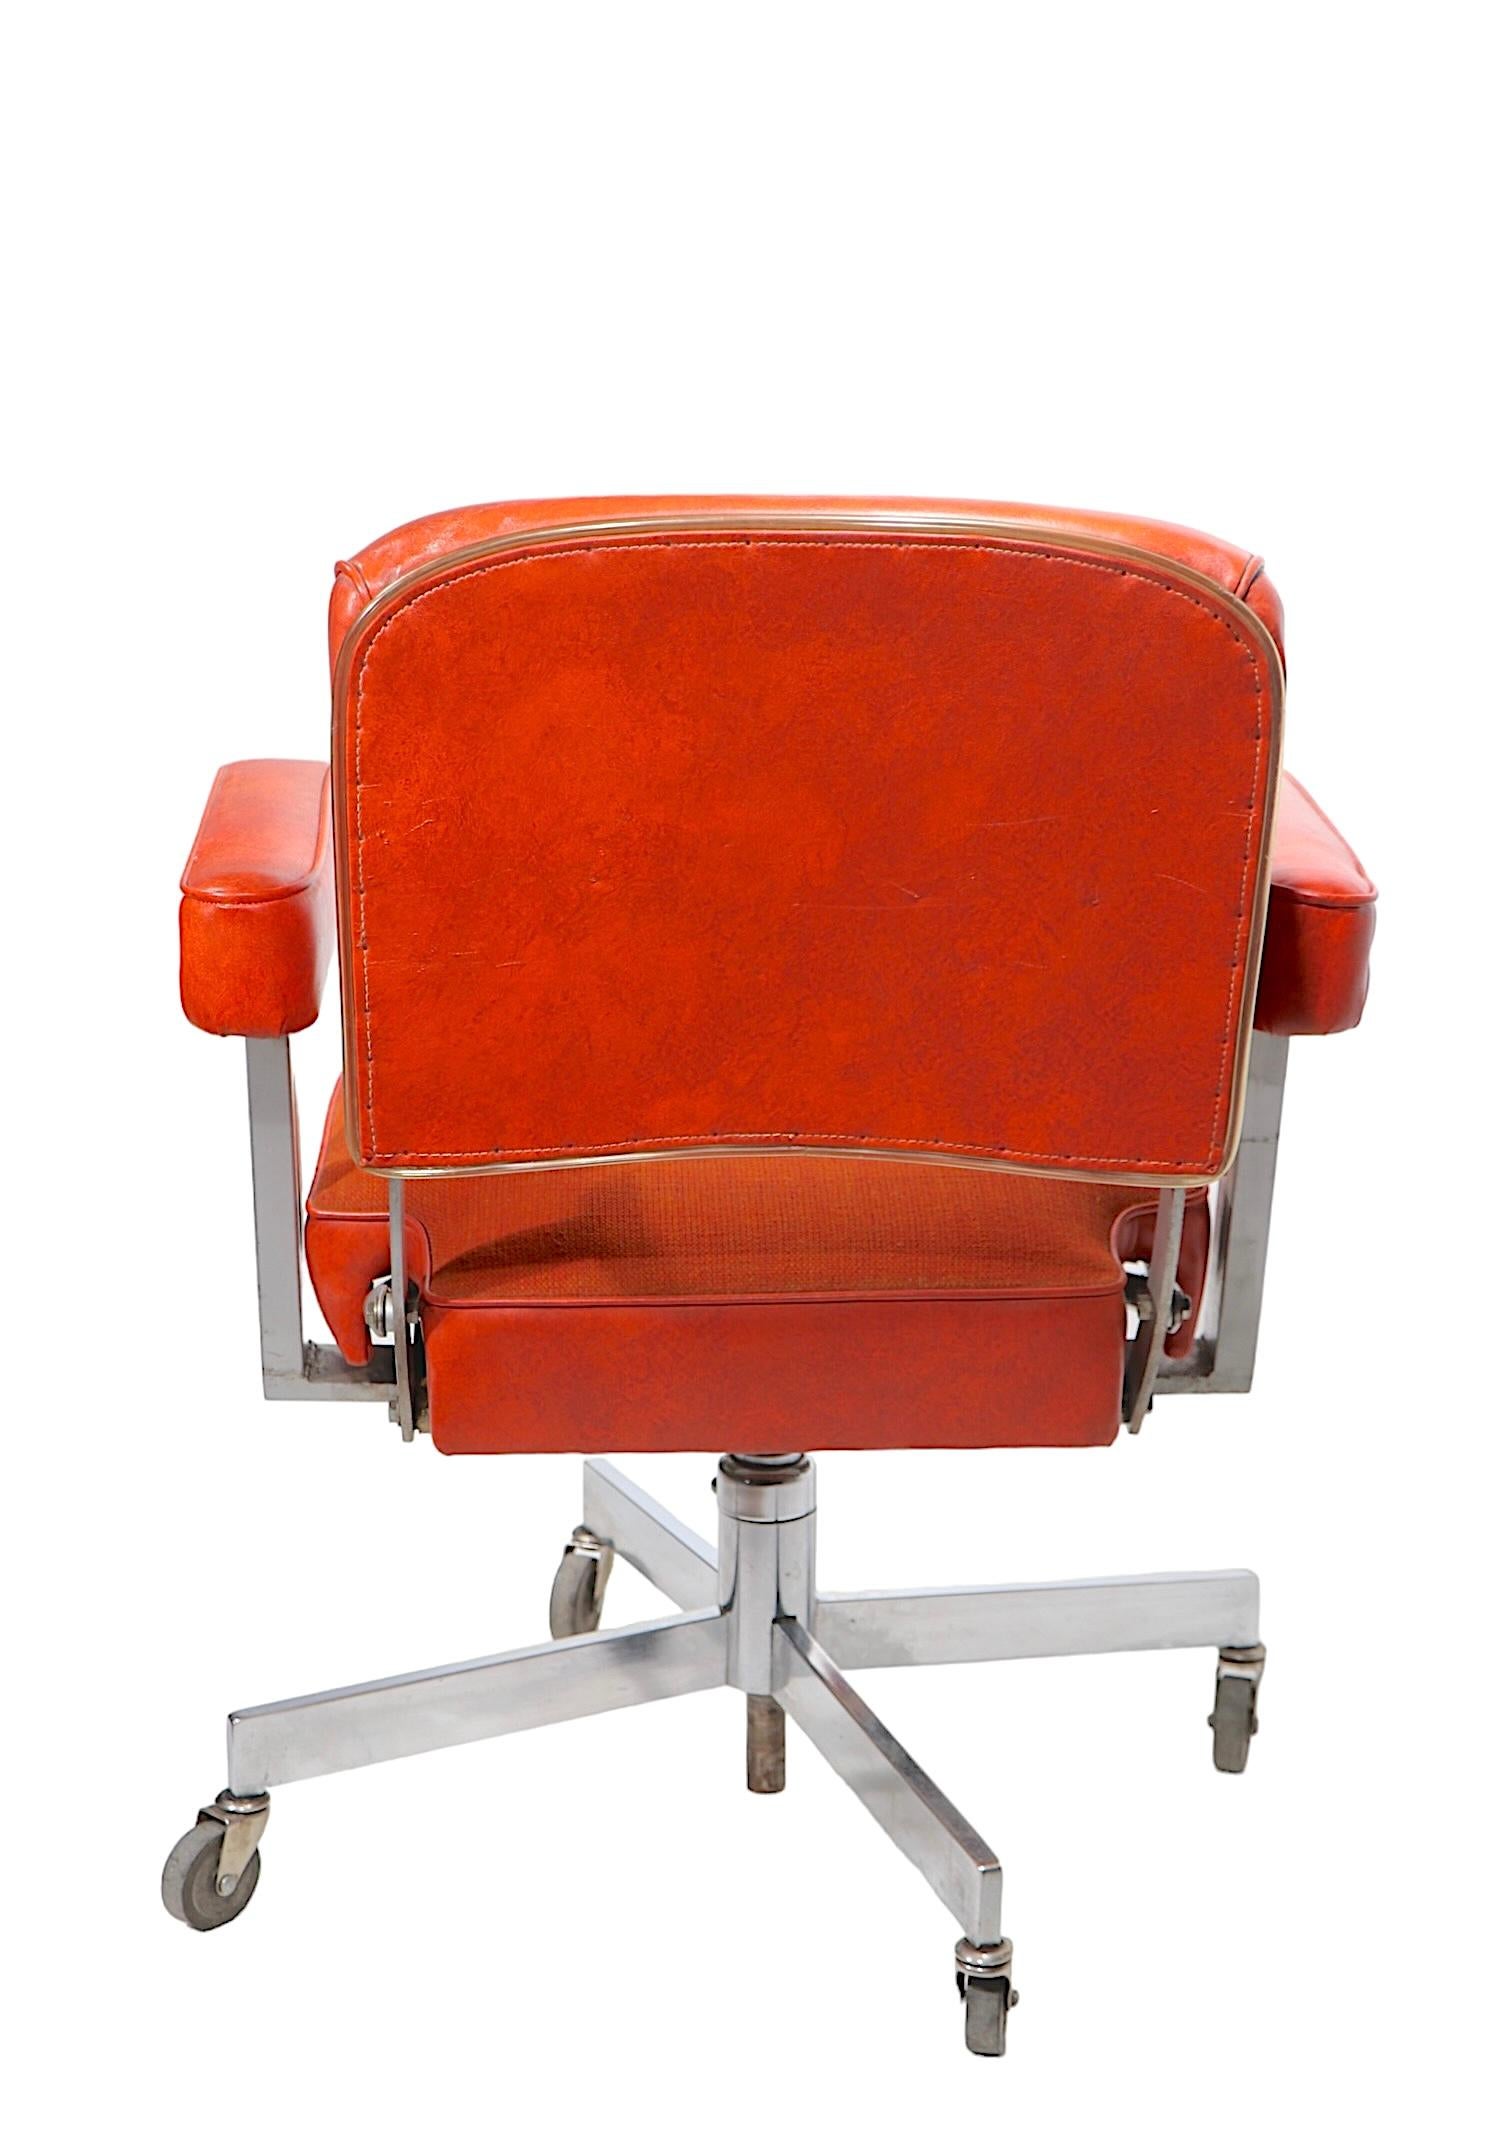 Executive Model DoMore Swivel Desk Office Chair Model 616 c 1950/1960's  For Sale 8